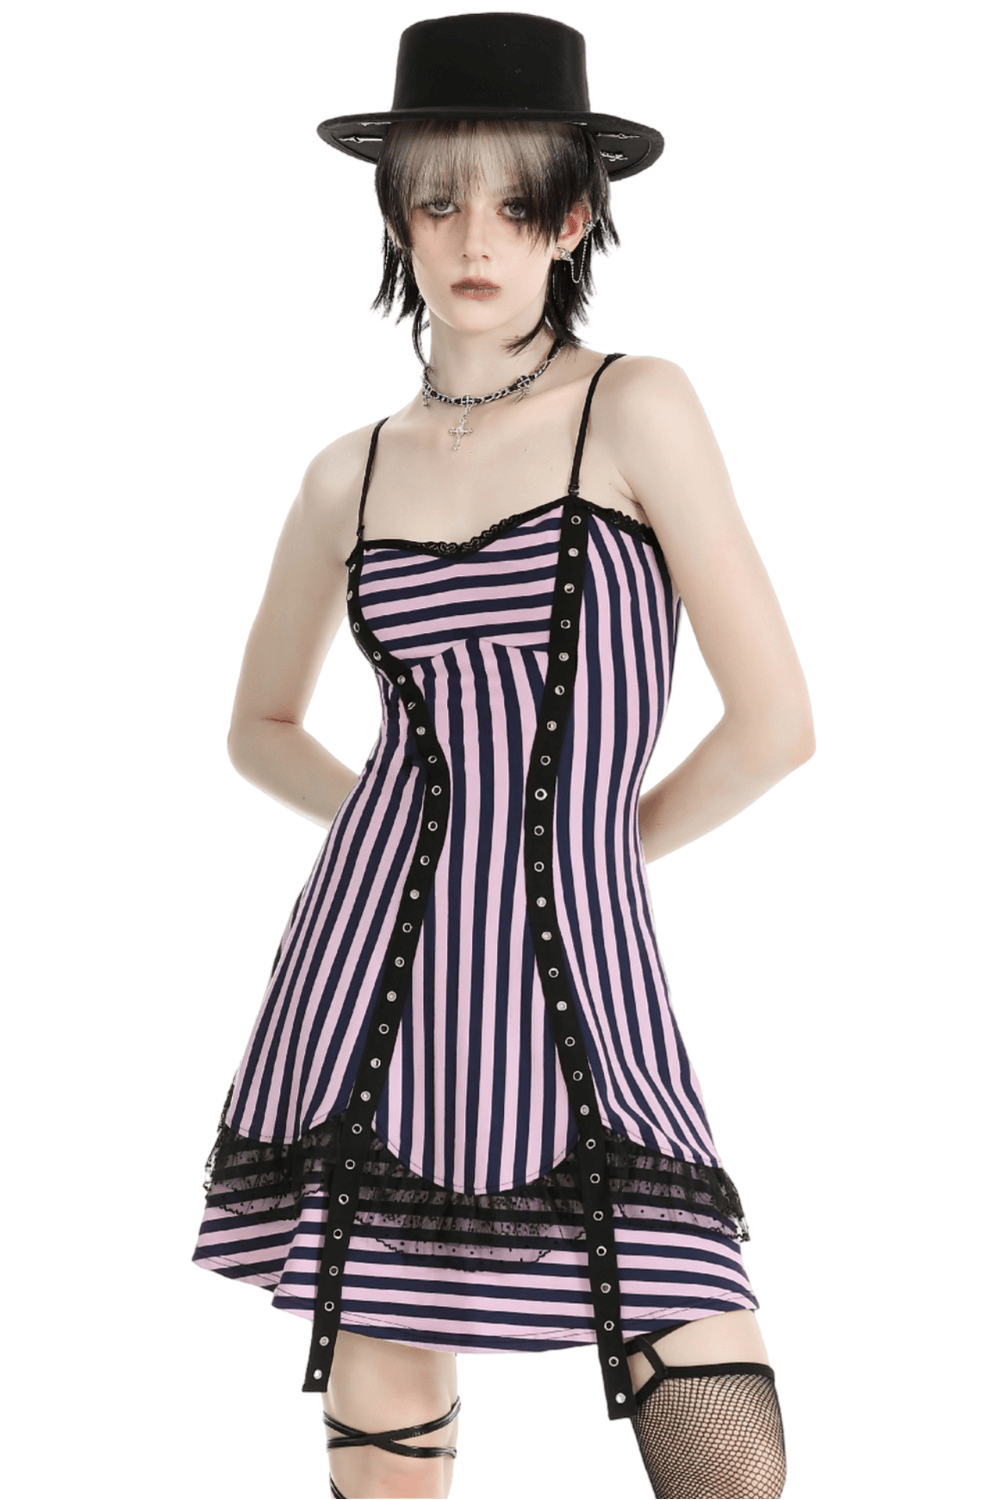 Gothic Pink and Black Striped Corset Dress with Lace Trim